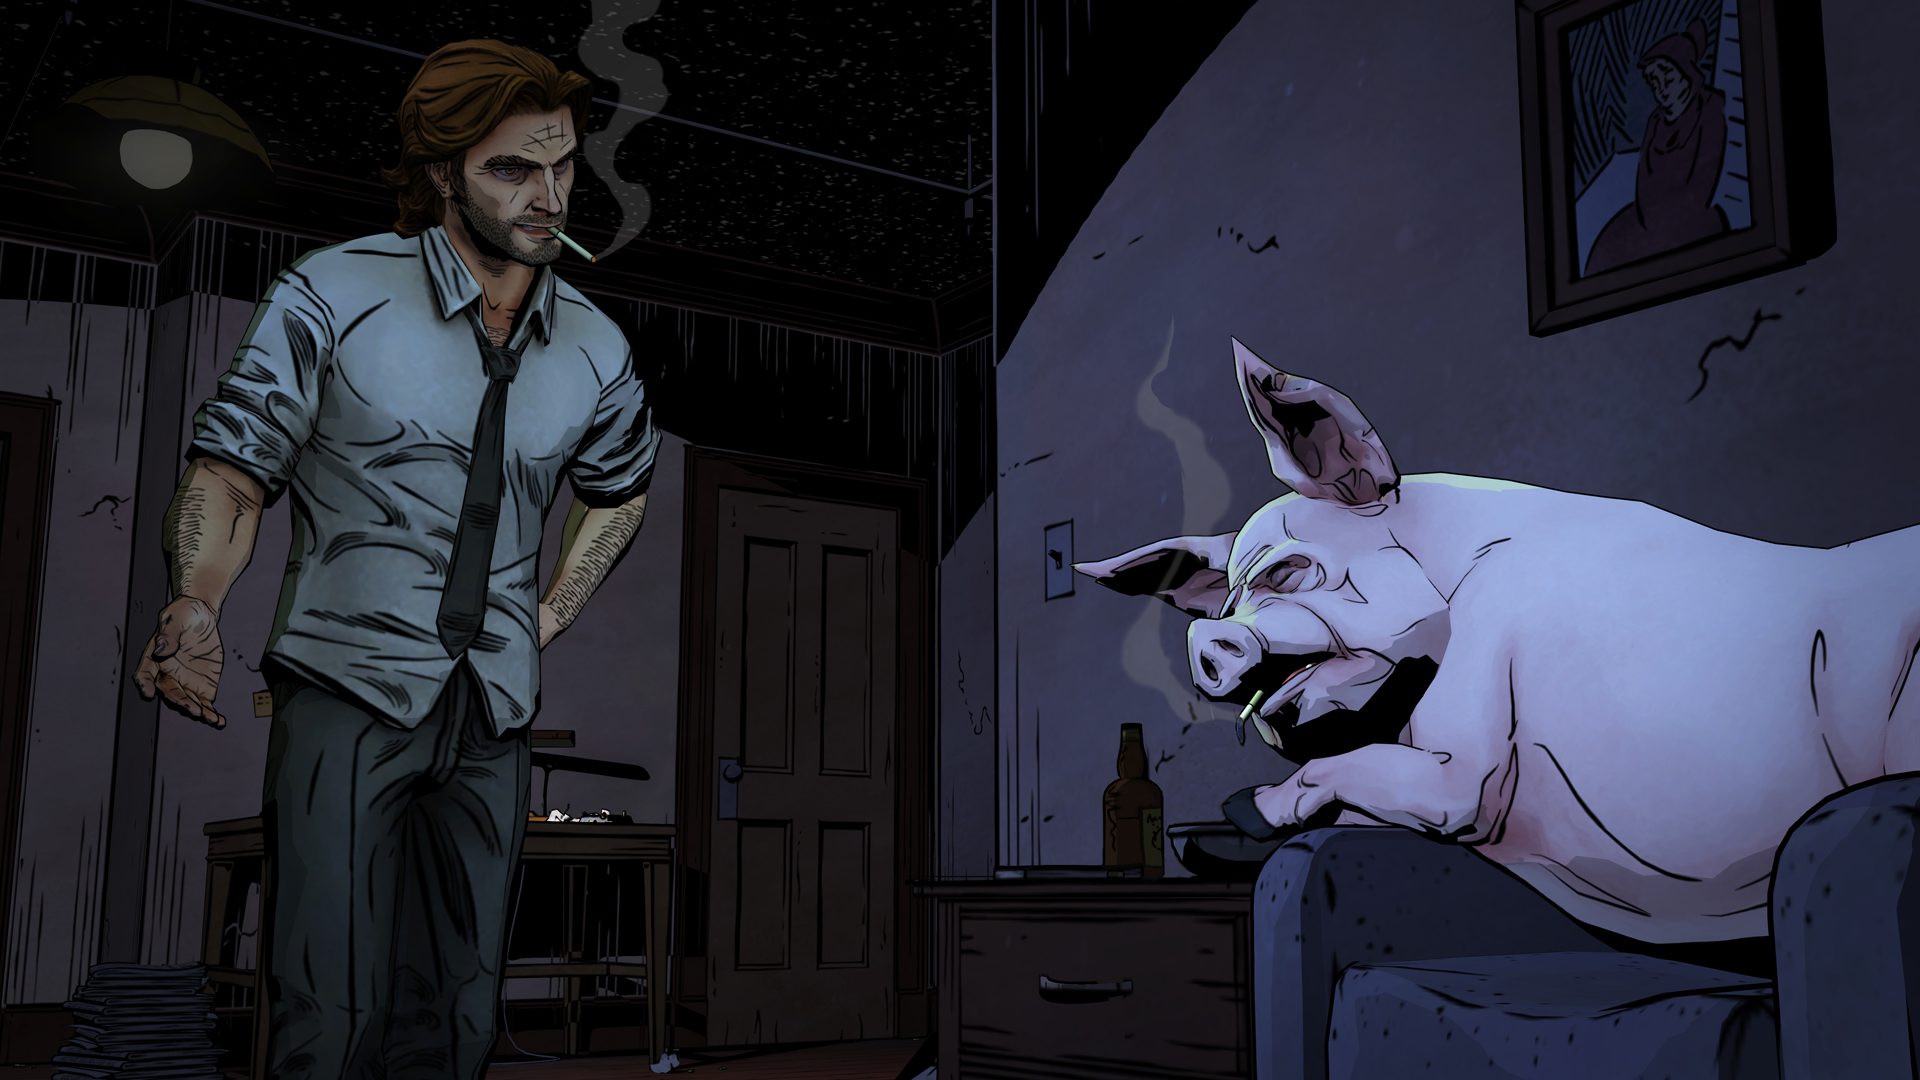 The Wolf Among Us downloading